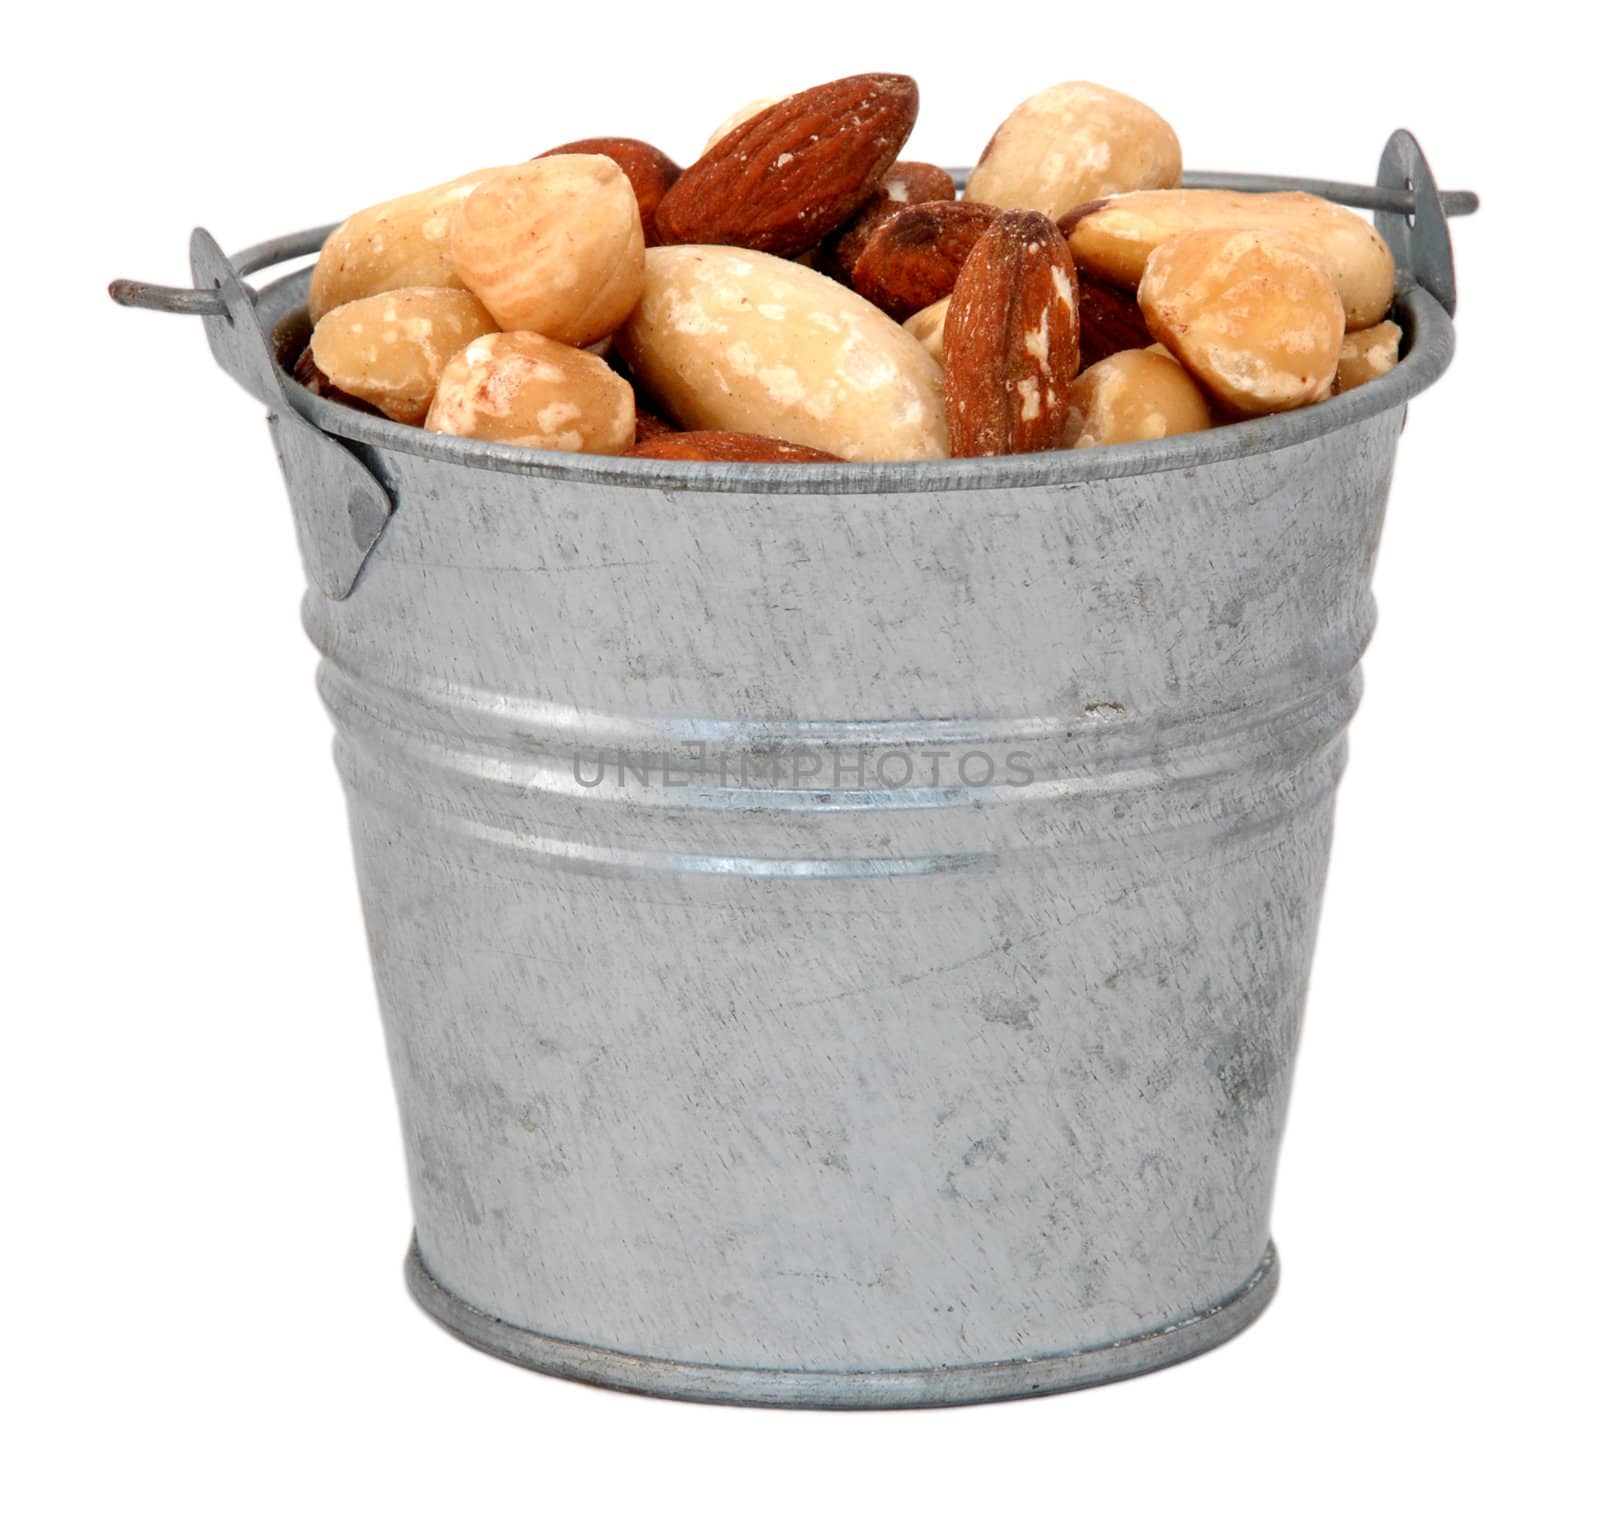 Mixed nuts in a miniature metal bucket, isolated on a white background